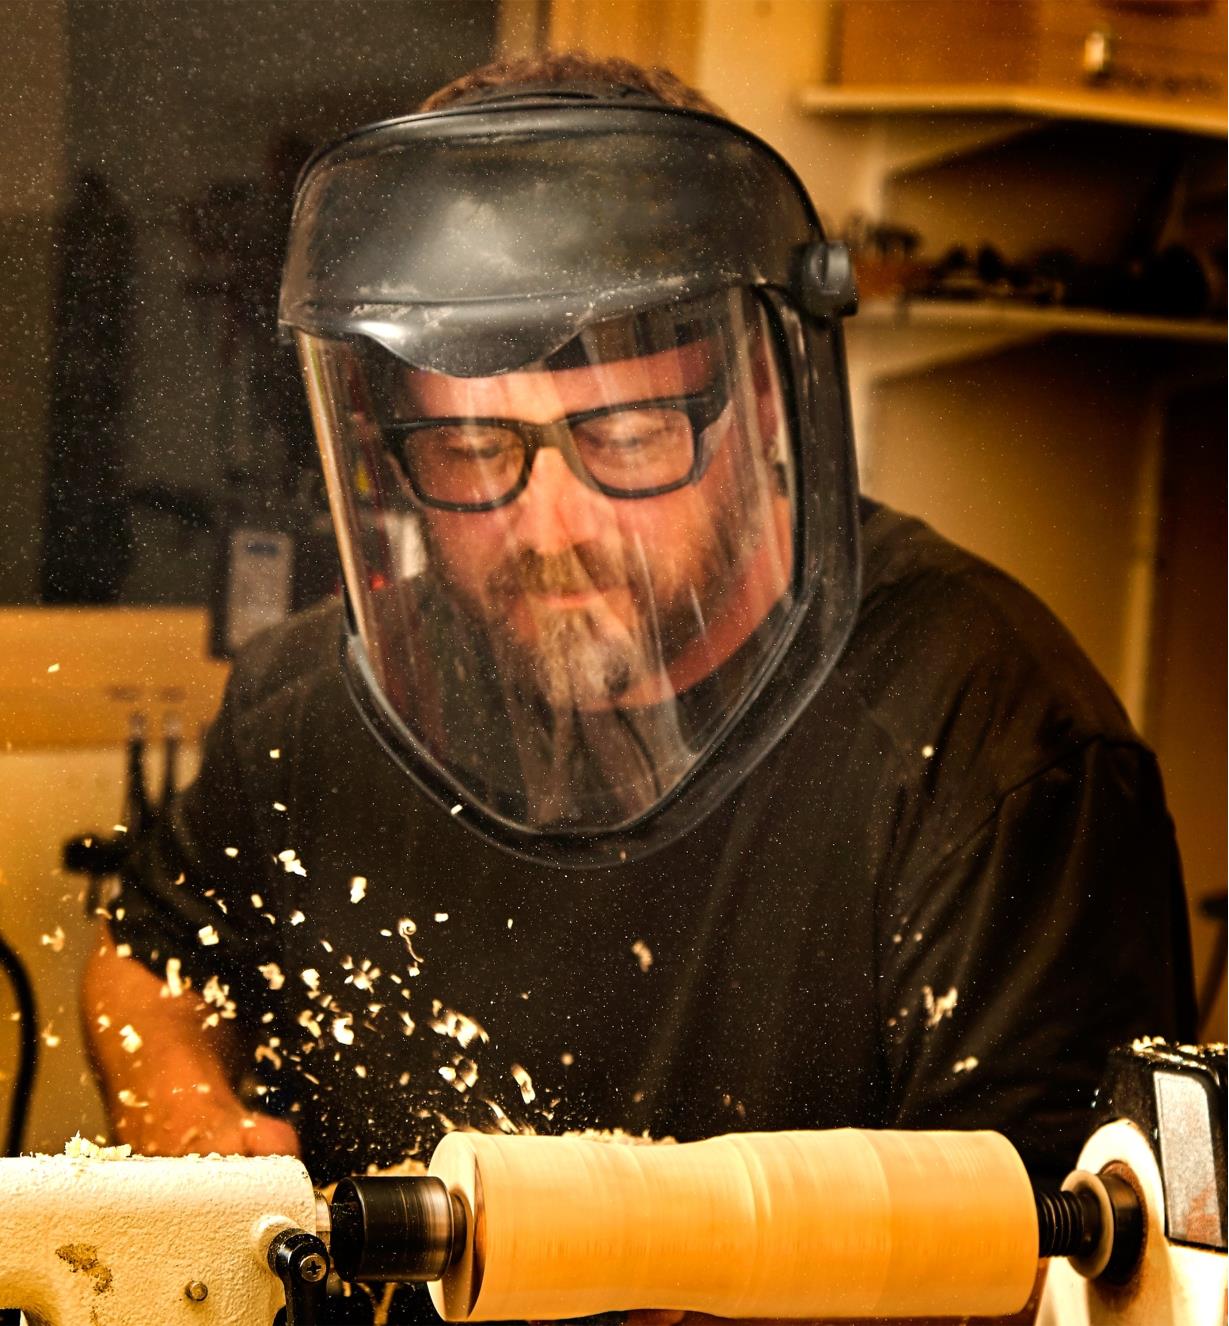 A man wears a Professional Face Shield while turning on a lathe